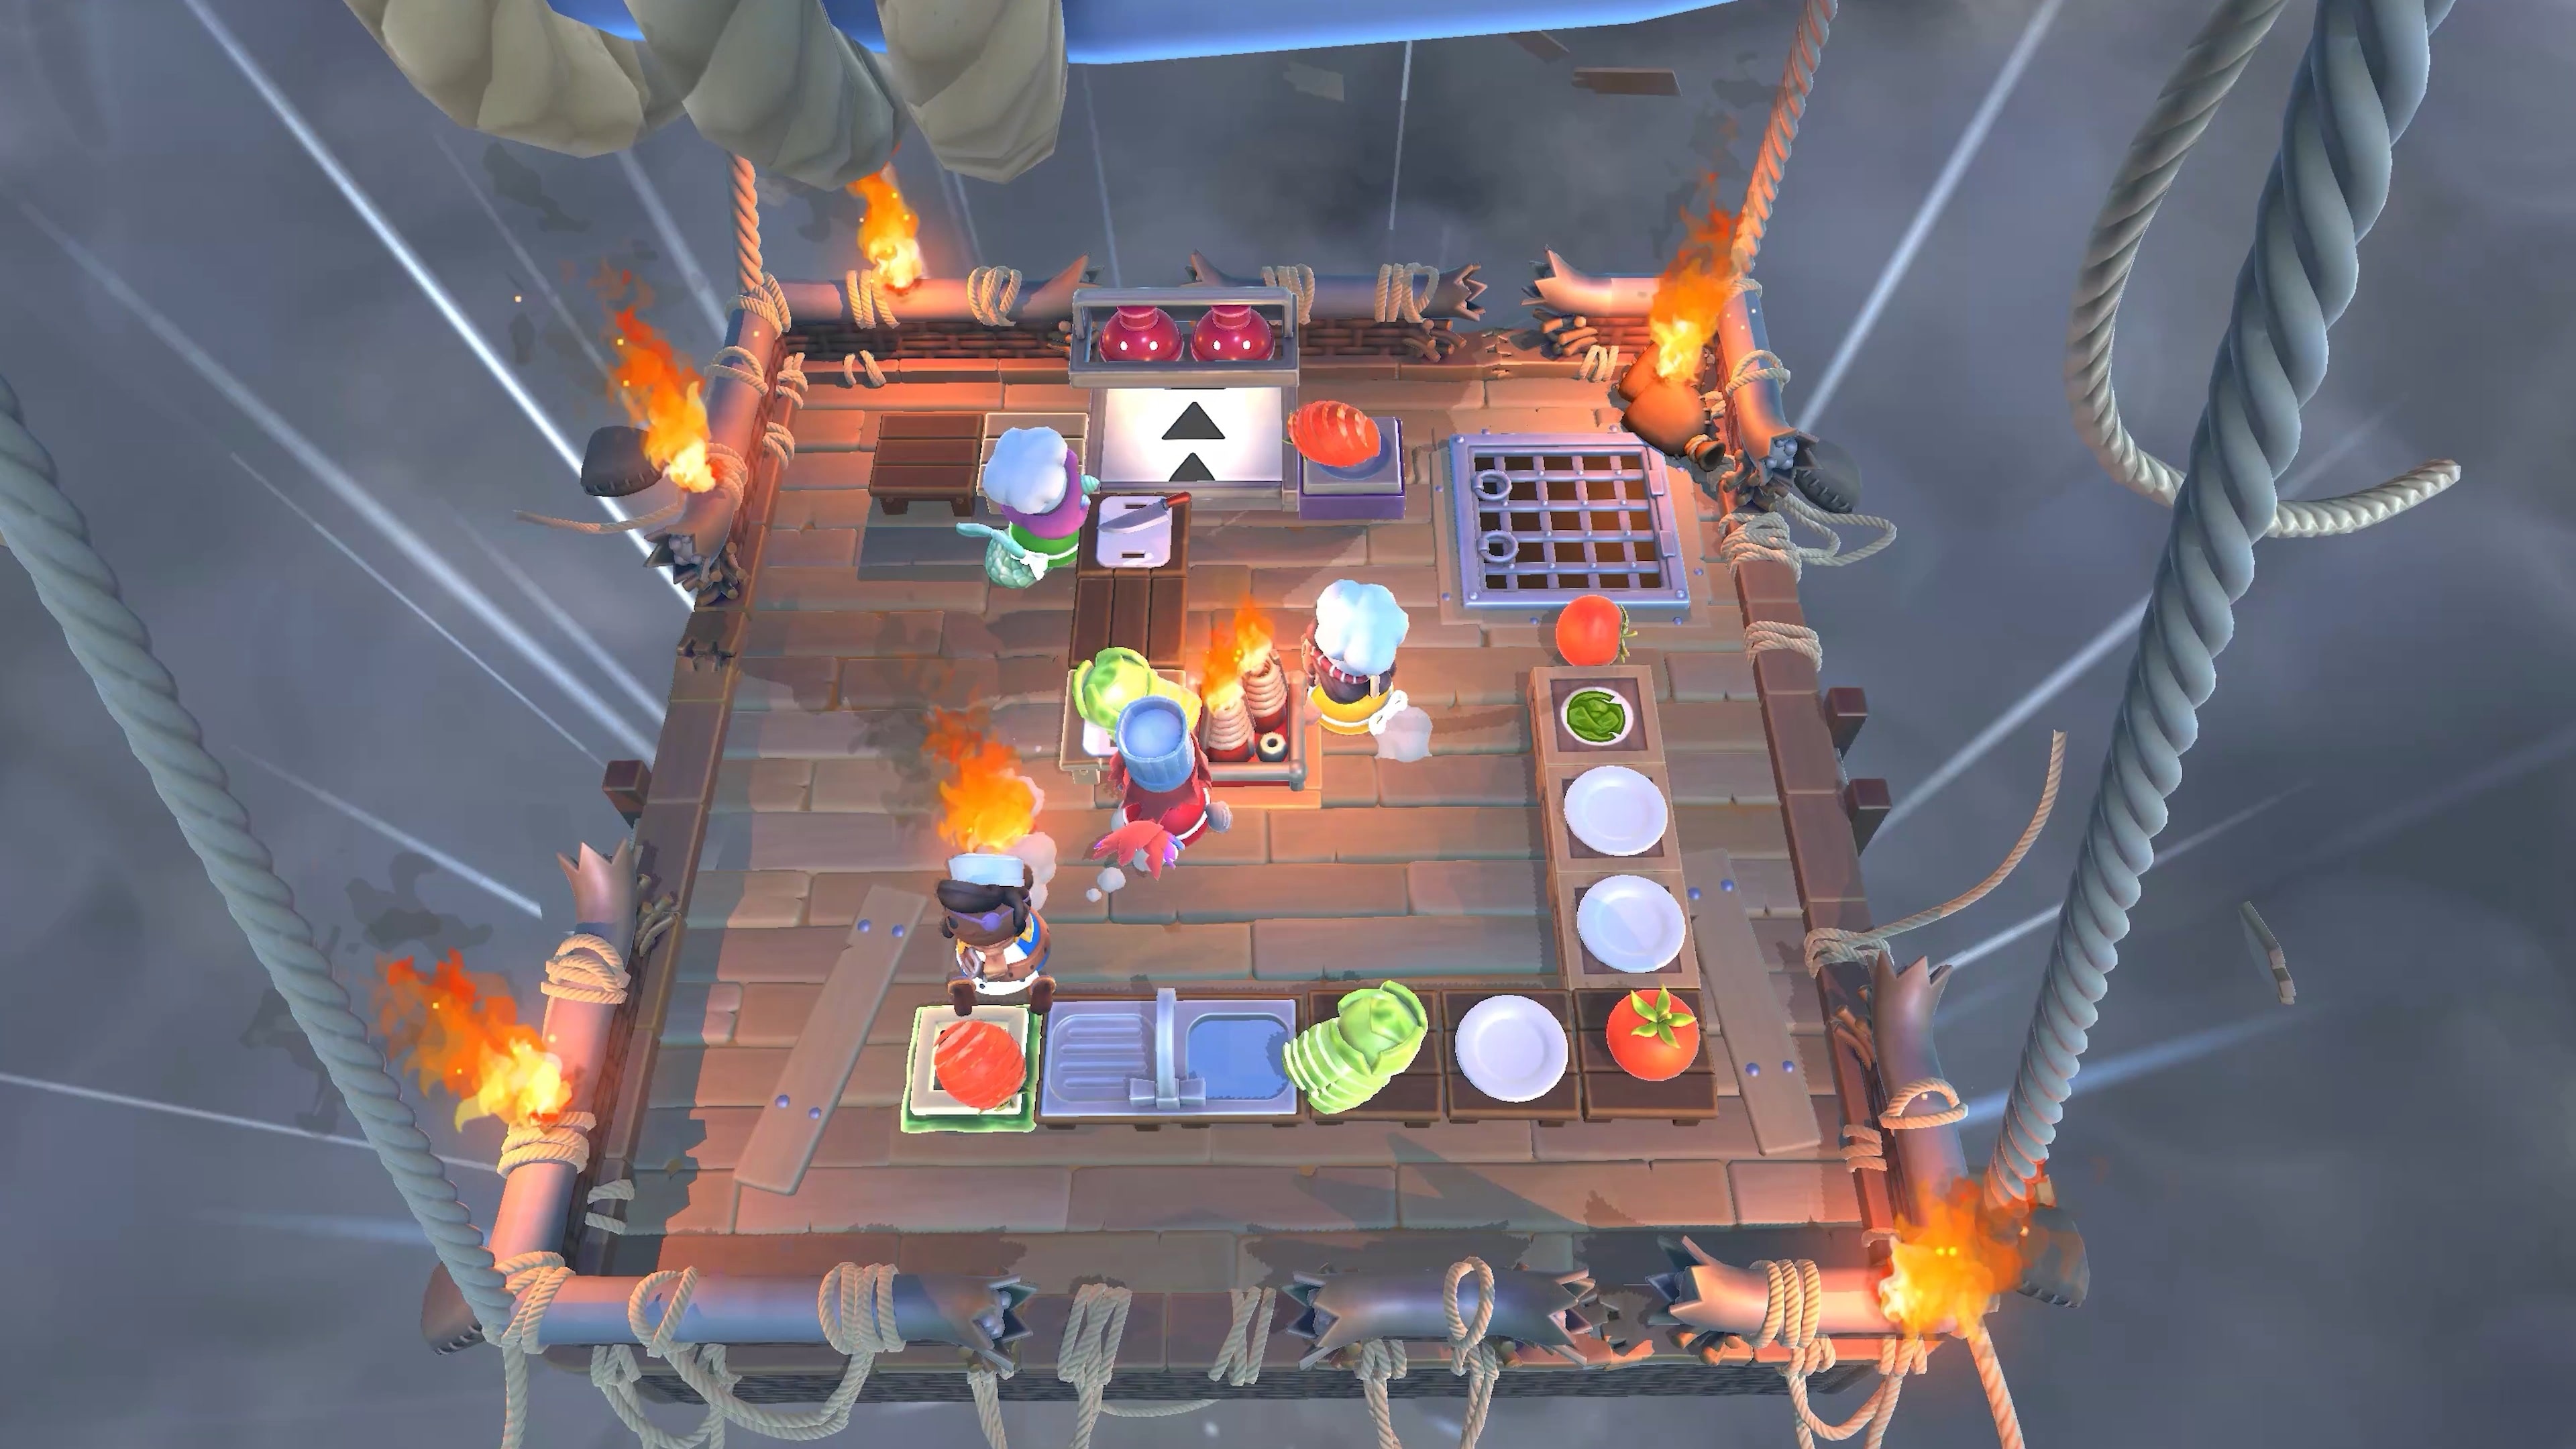 Overcooked All You Can Eat - PS4 - Game Games - Loja de Games Online